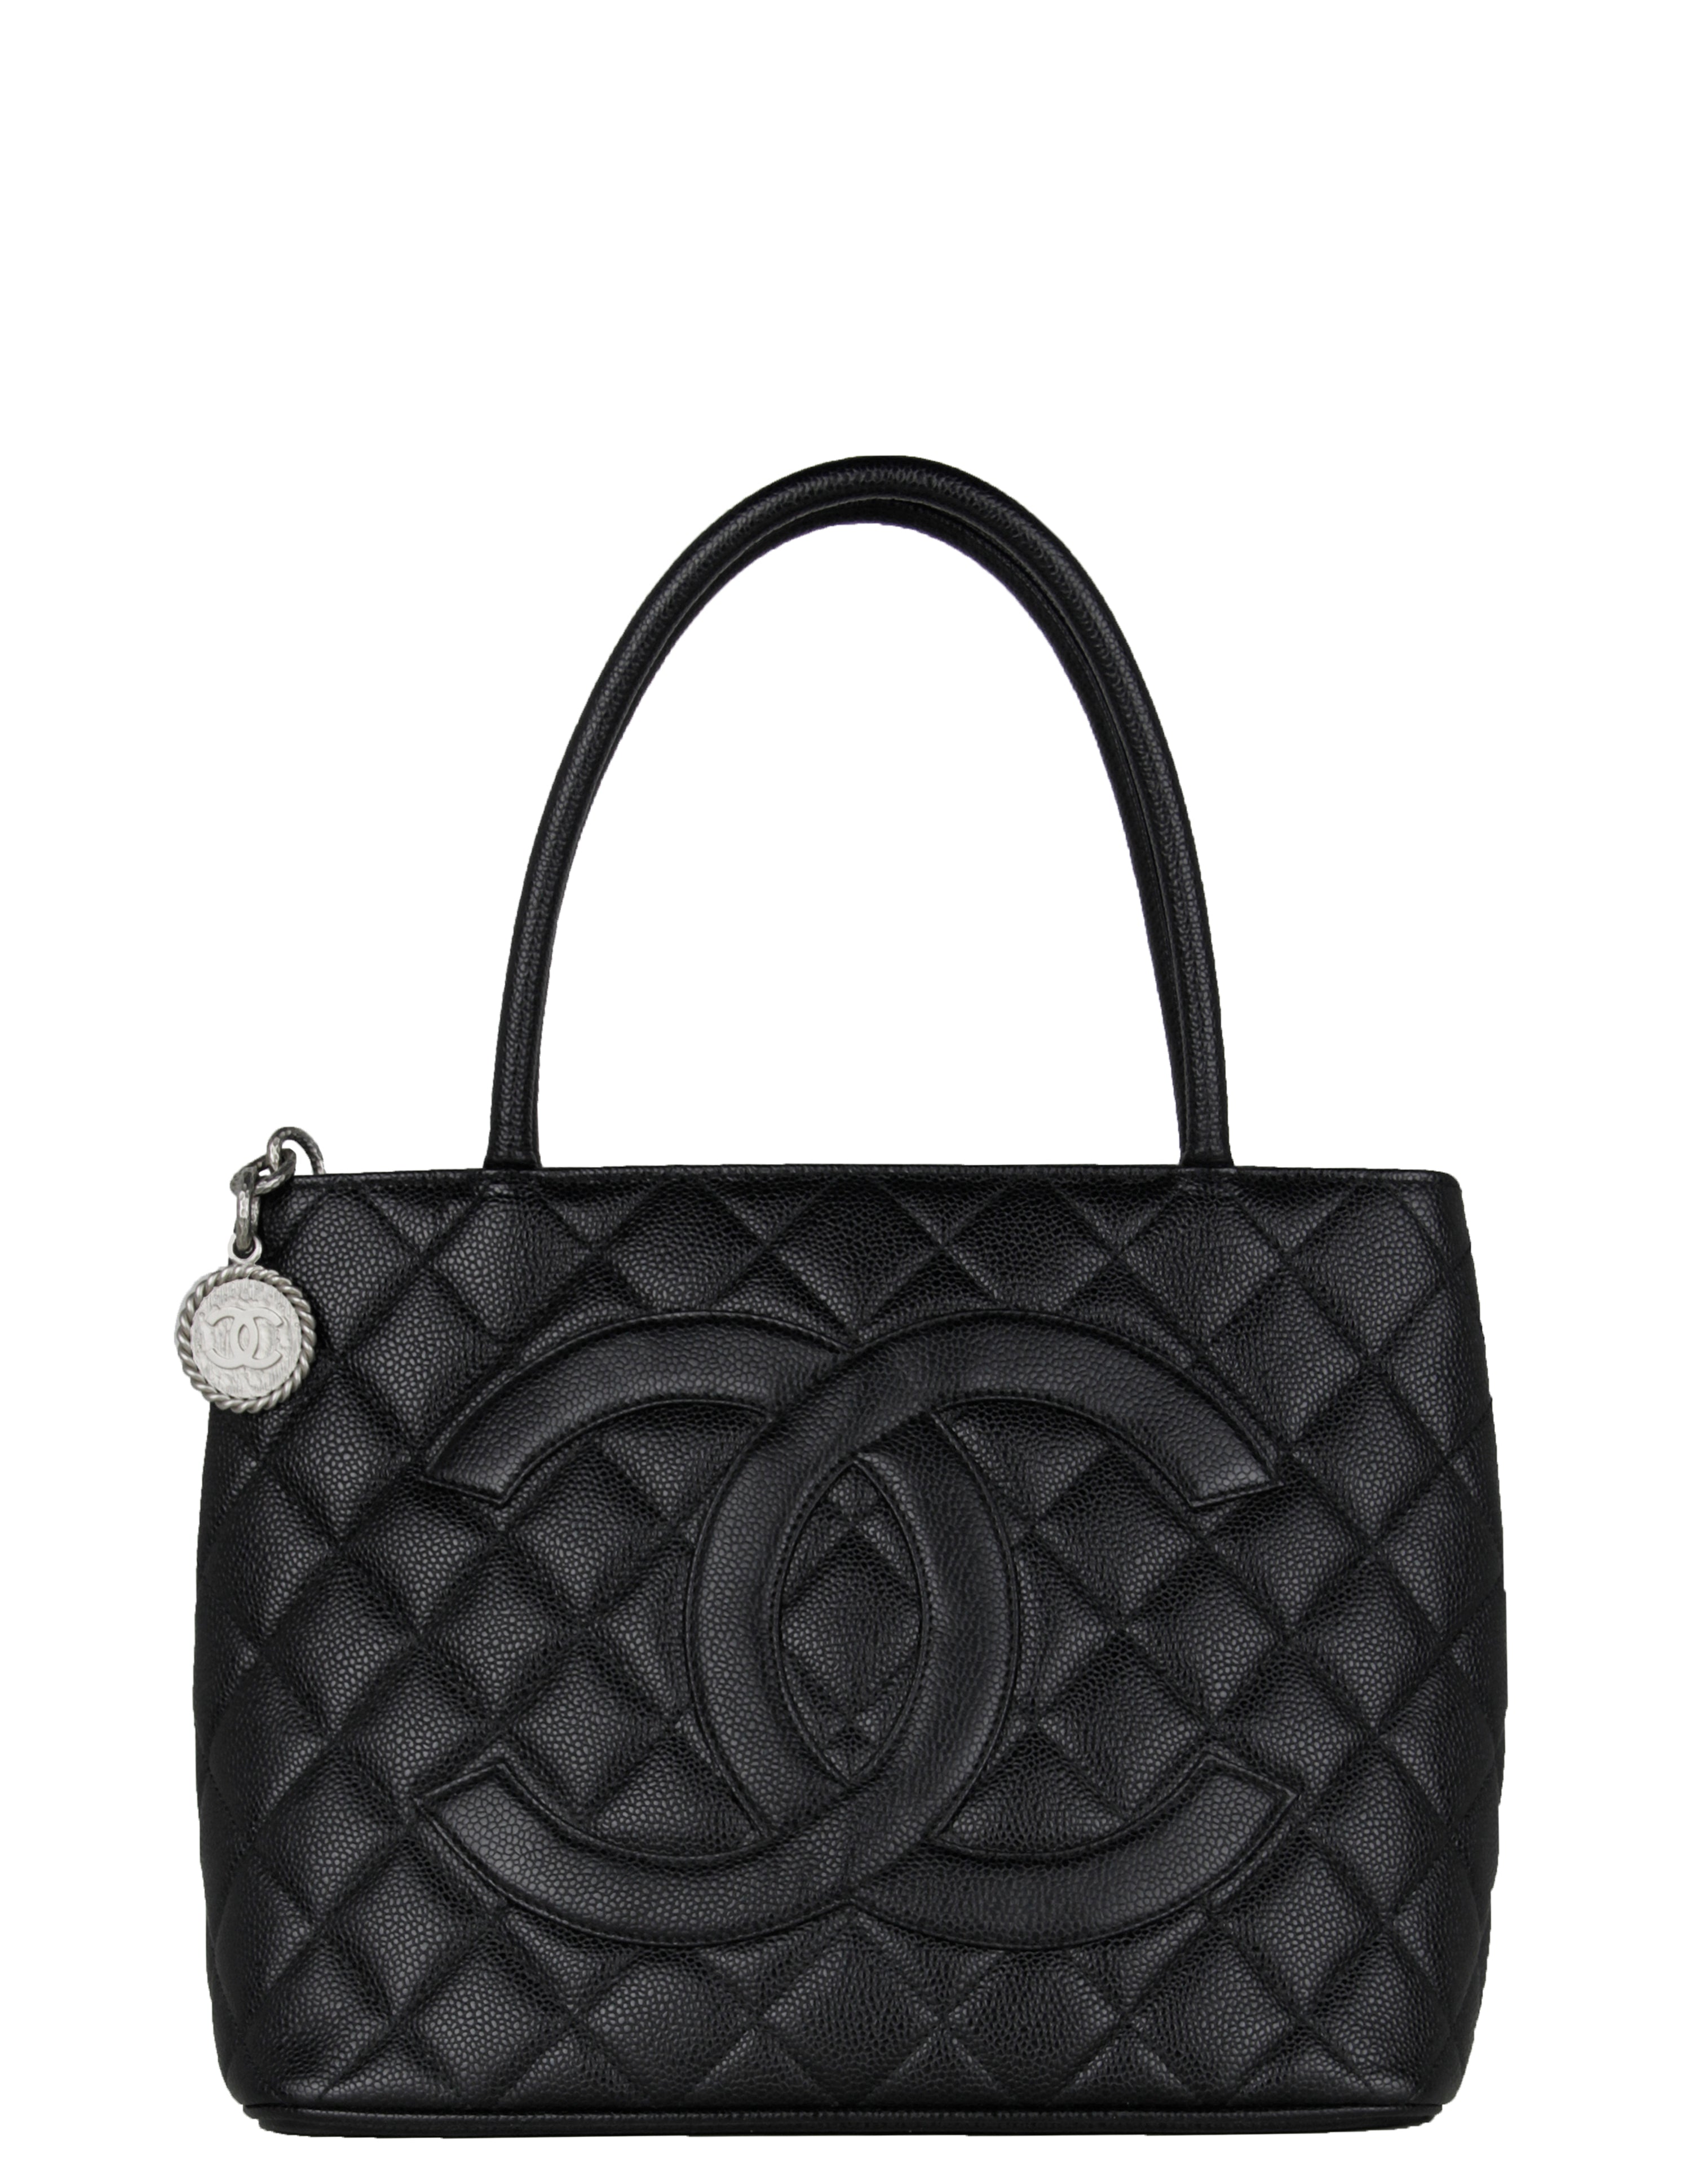 Chanel Pre-owned 2002 Medallion Leather Tote Bag - Black